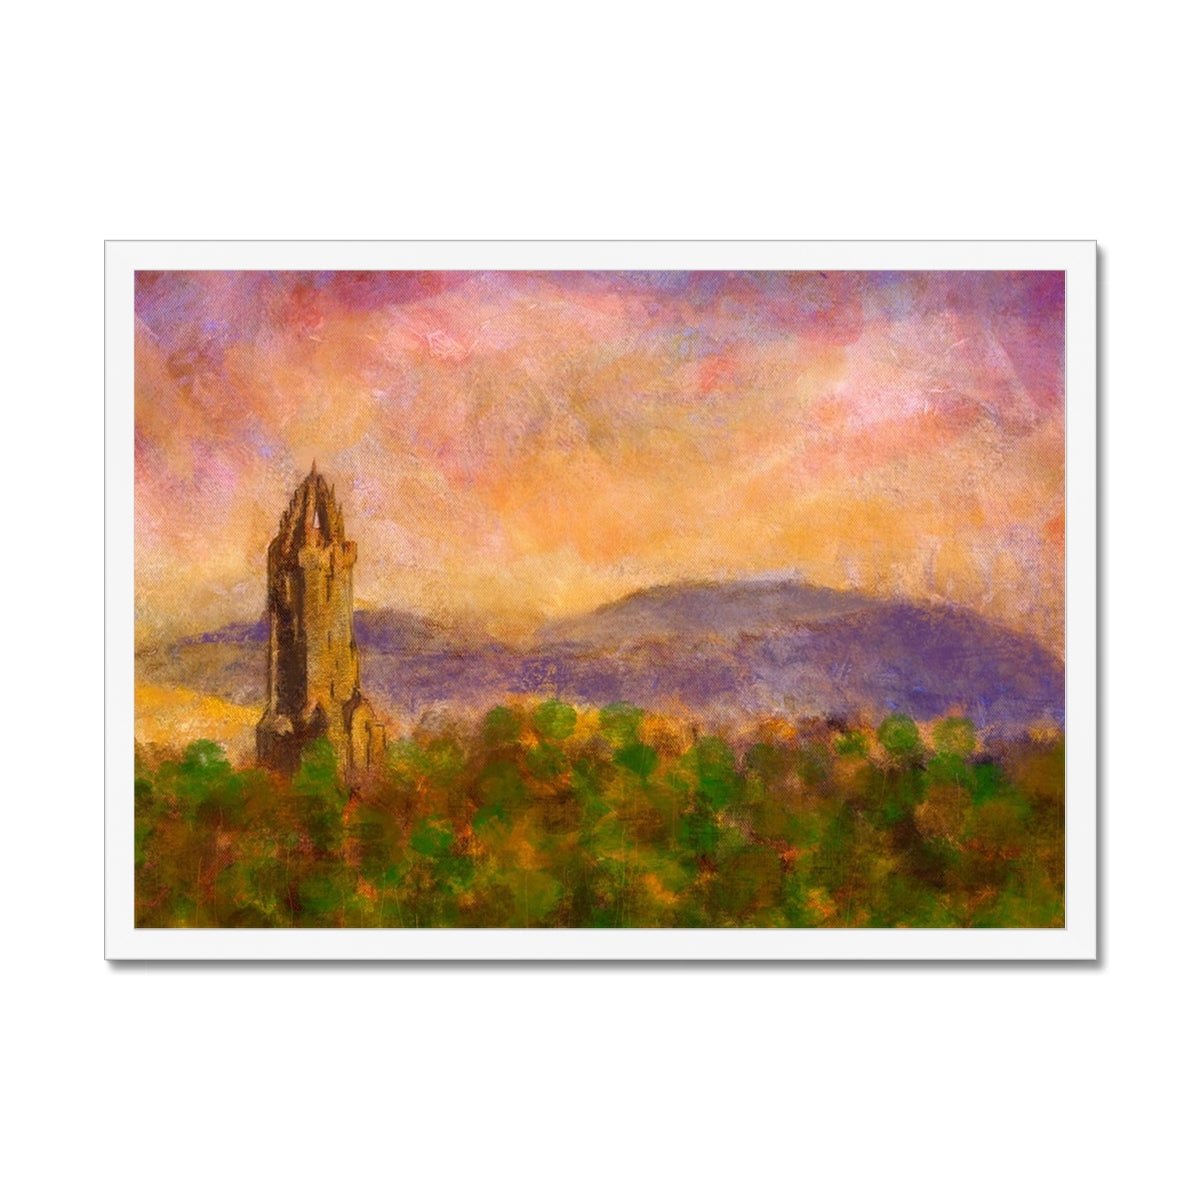 Wallace Monument Dusk Painting | Framed Prints From Scotland-Framed Prints-Historic & Iconic Scotland Art Gallery-A2 Landscape-White Frame-Paintings, Prints, Homeware, Art Gifts From Scotland By Scottish Artist Kevin Hunter